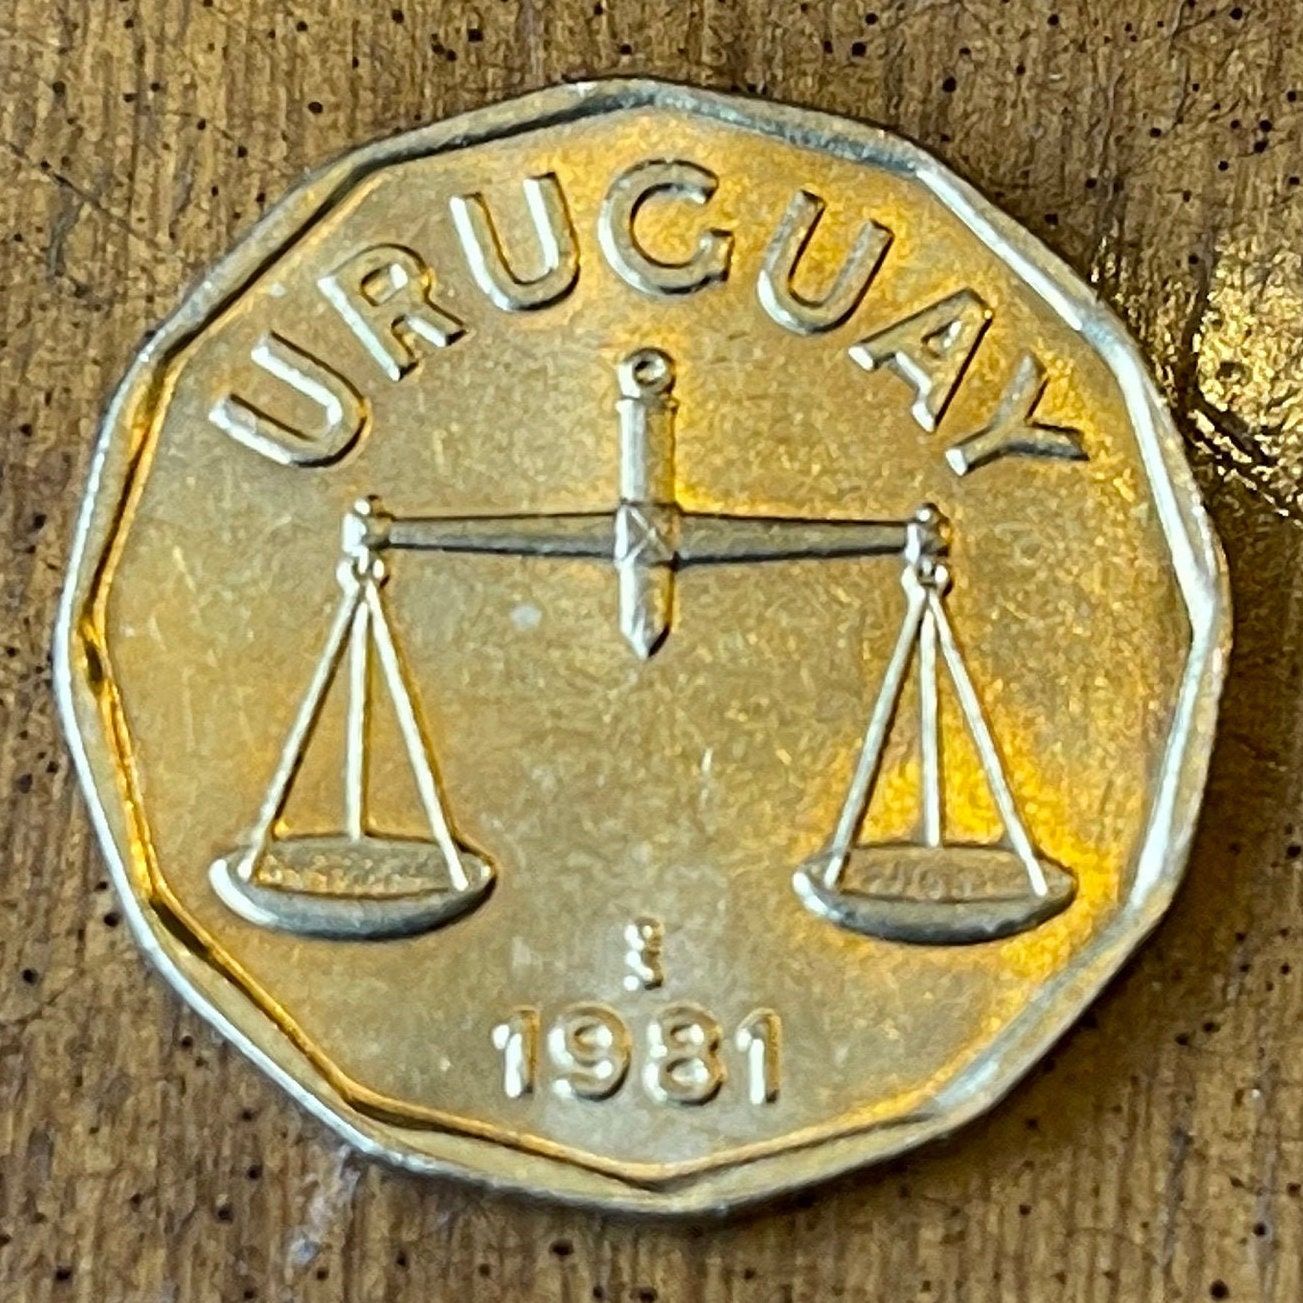 Scales of Justice 50 Centesimos Uruguay Authentic Coin Money for Jewelry and Craft Making (Libra)